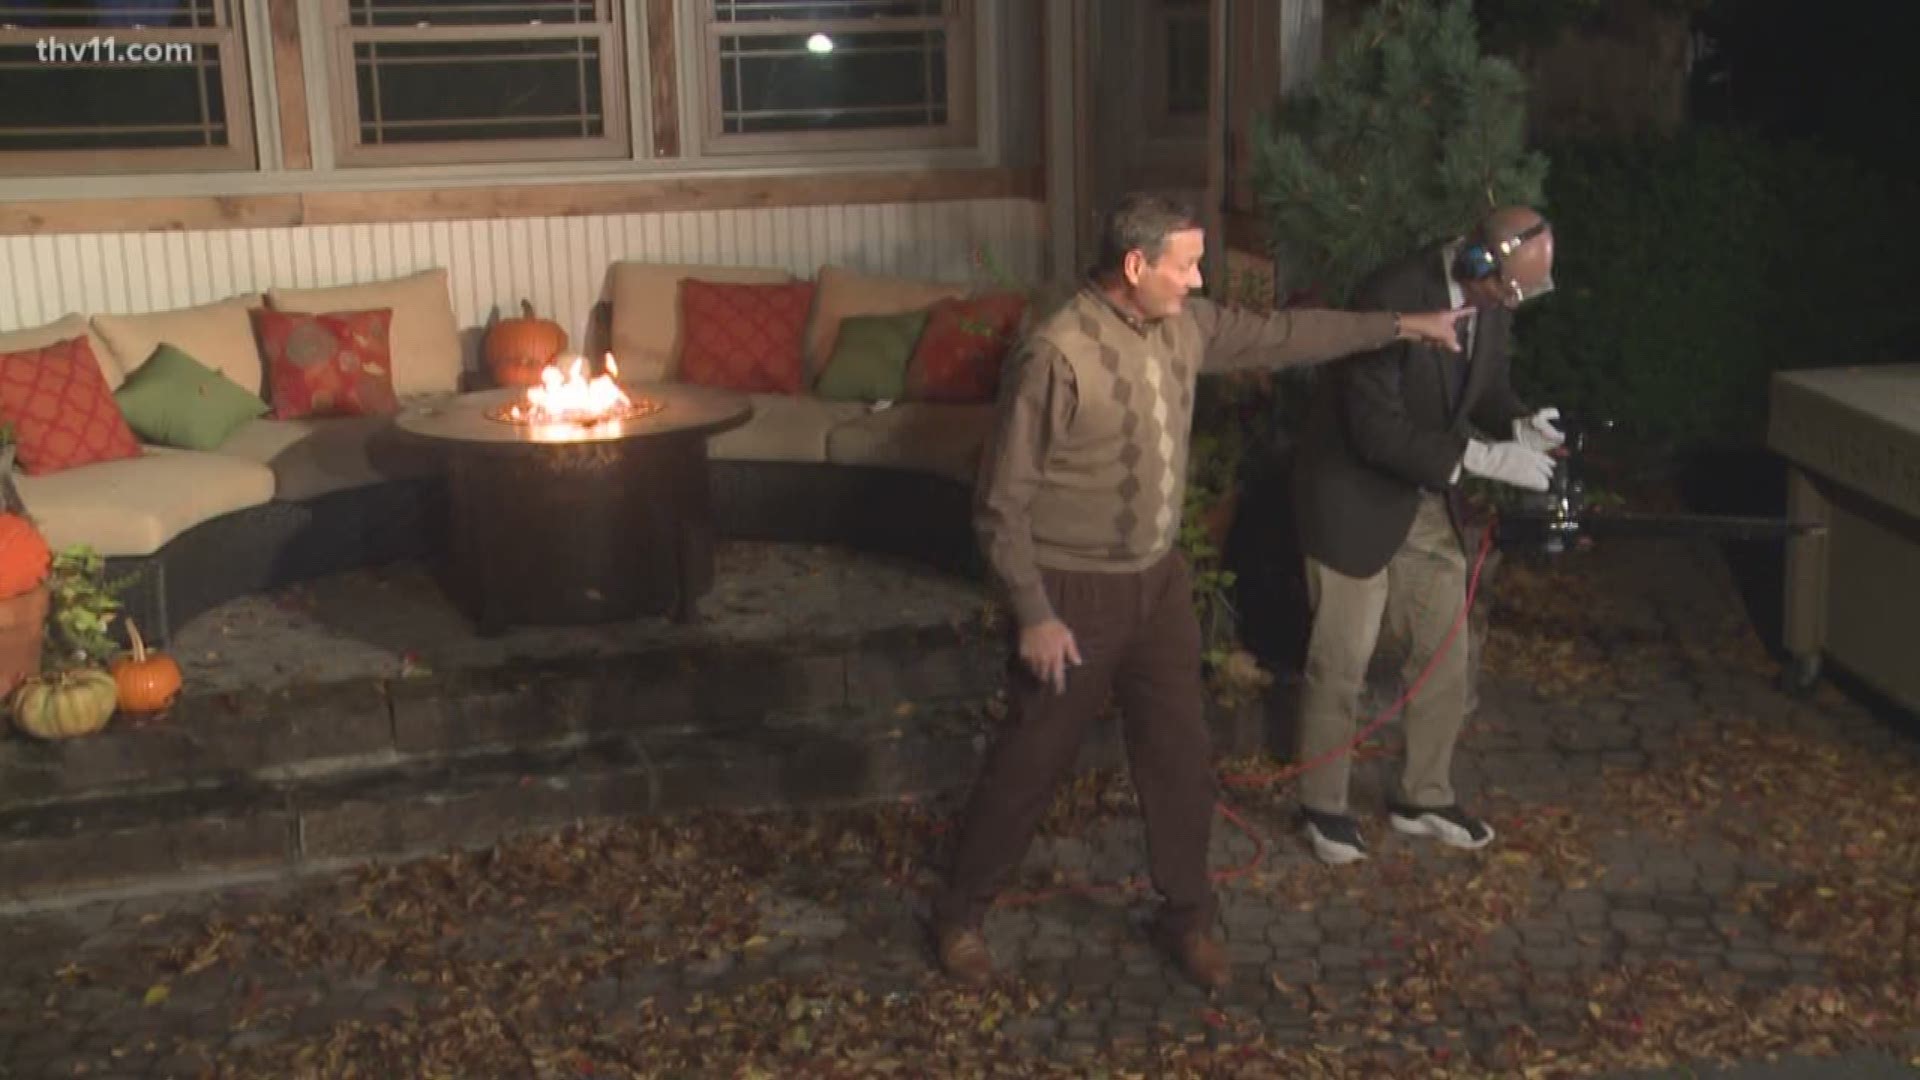 Ed Buckner was getting ready to do the weather forecast when Craig O'Neill decided it was time to do some leaf blowing